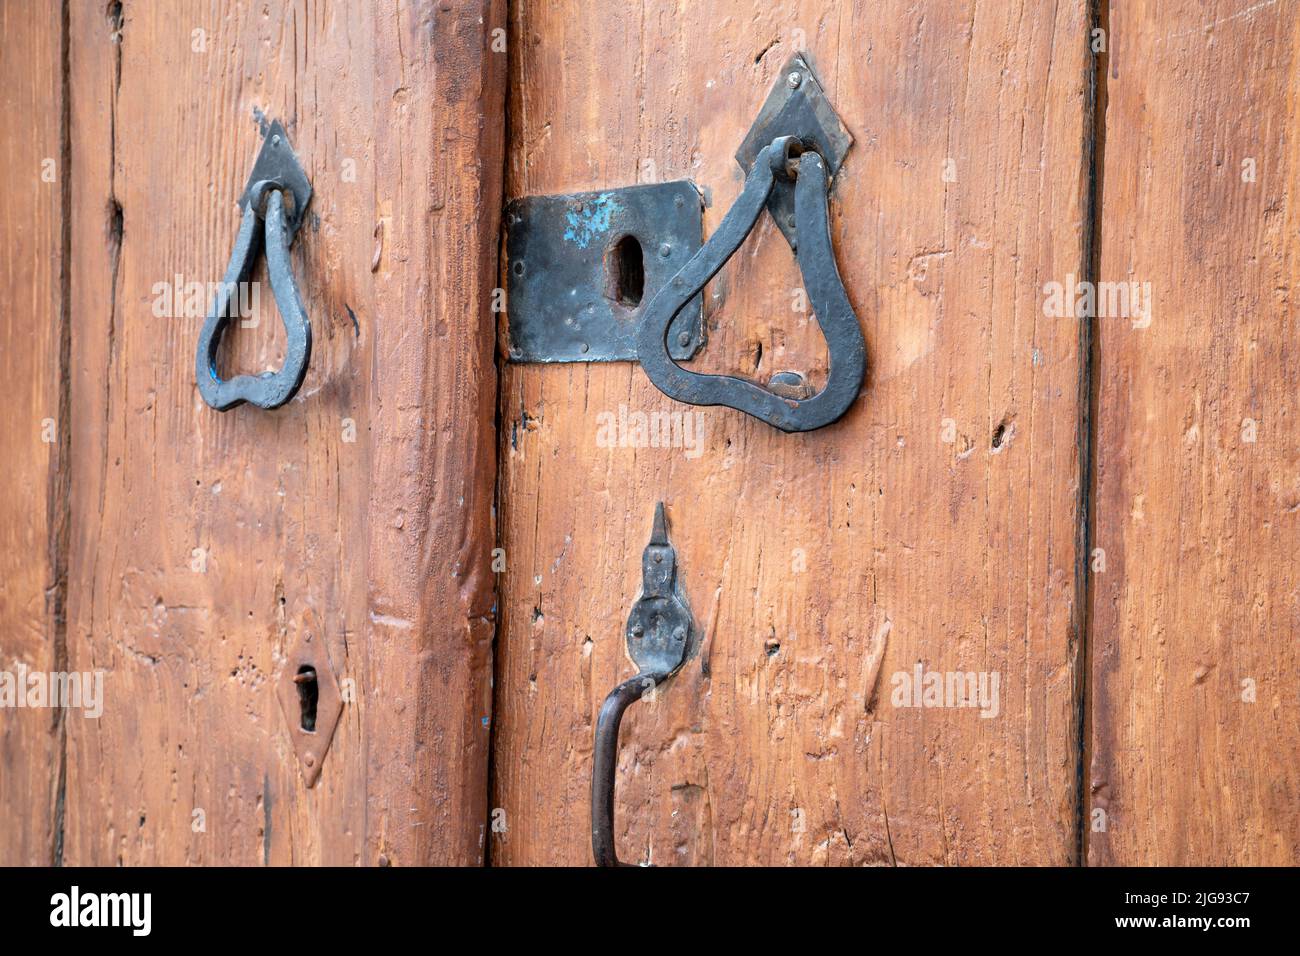 Vintage image of ancient door knocker on a wood Stock Photo